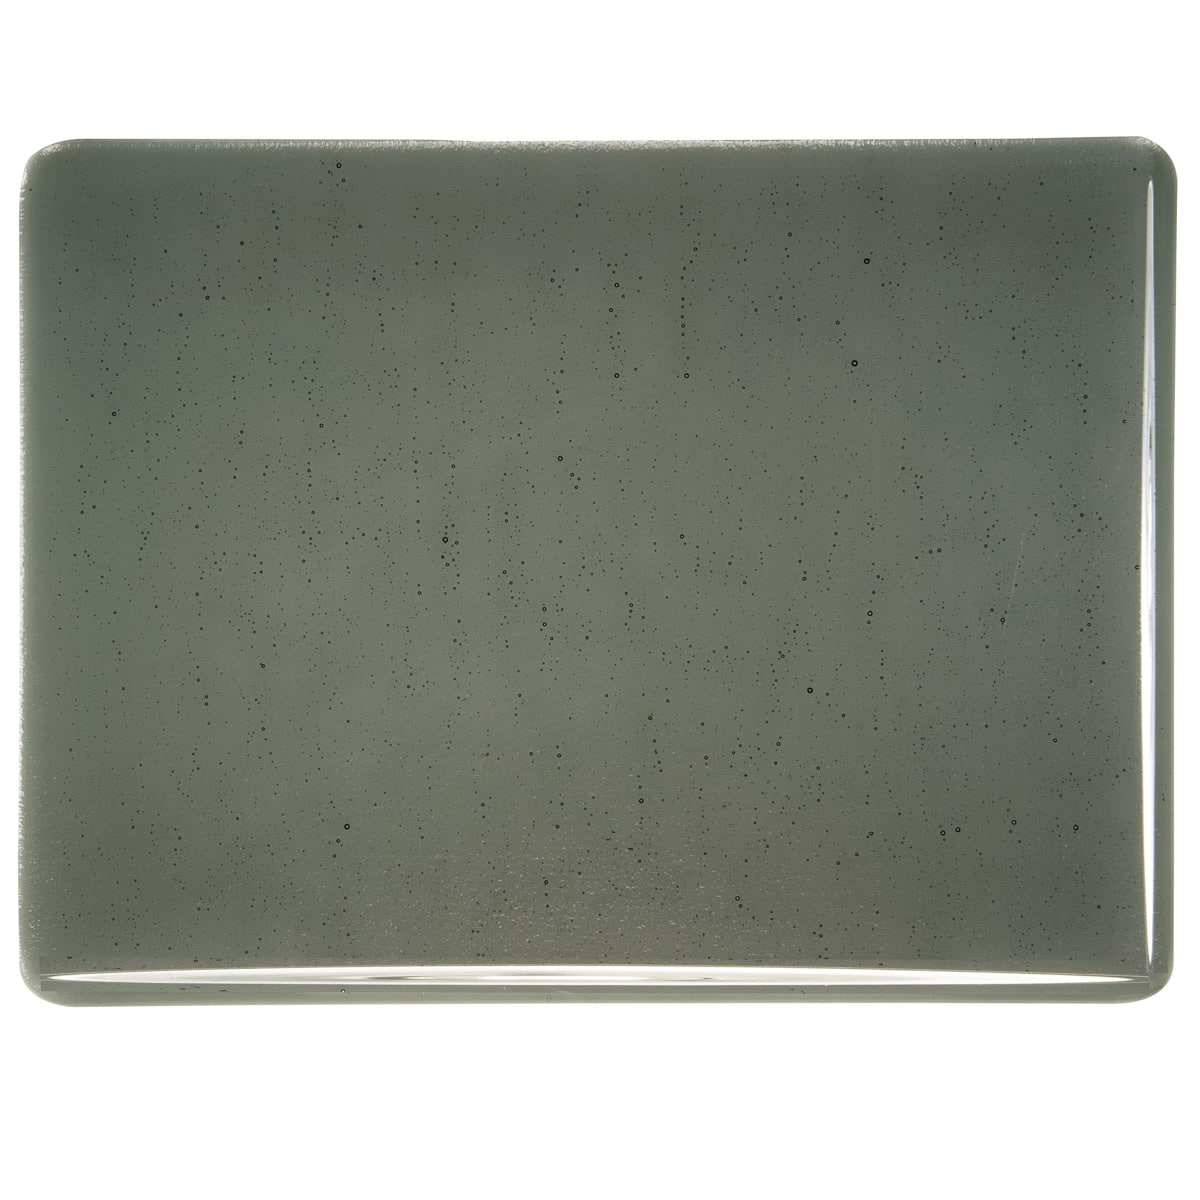 001129 Transparent Charcoal Gray sheet glass swatch